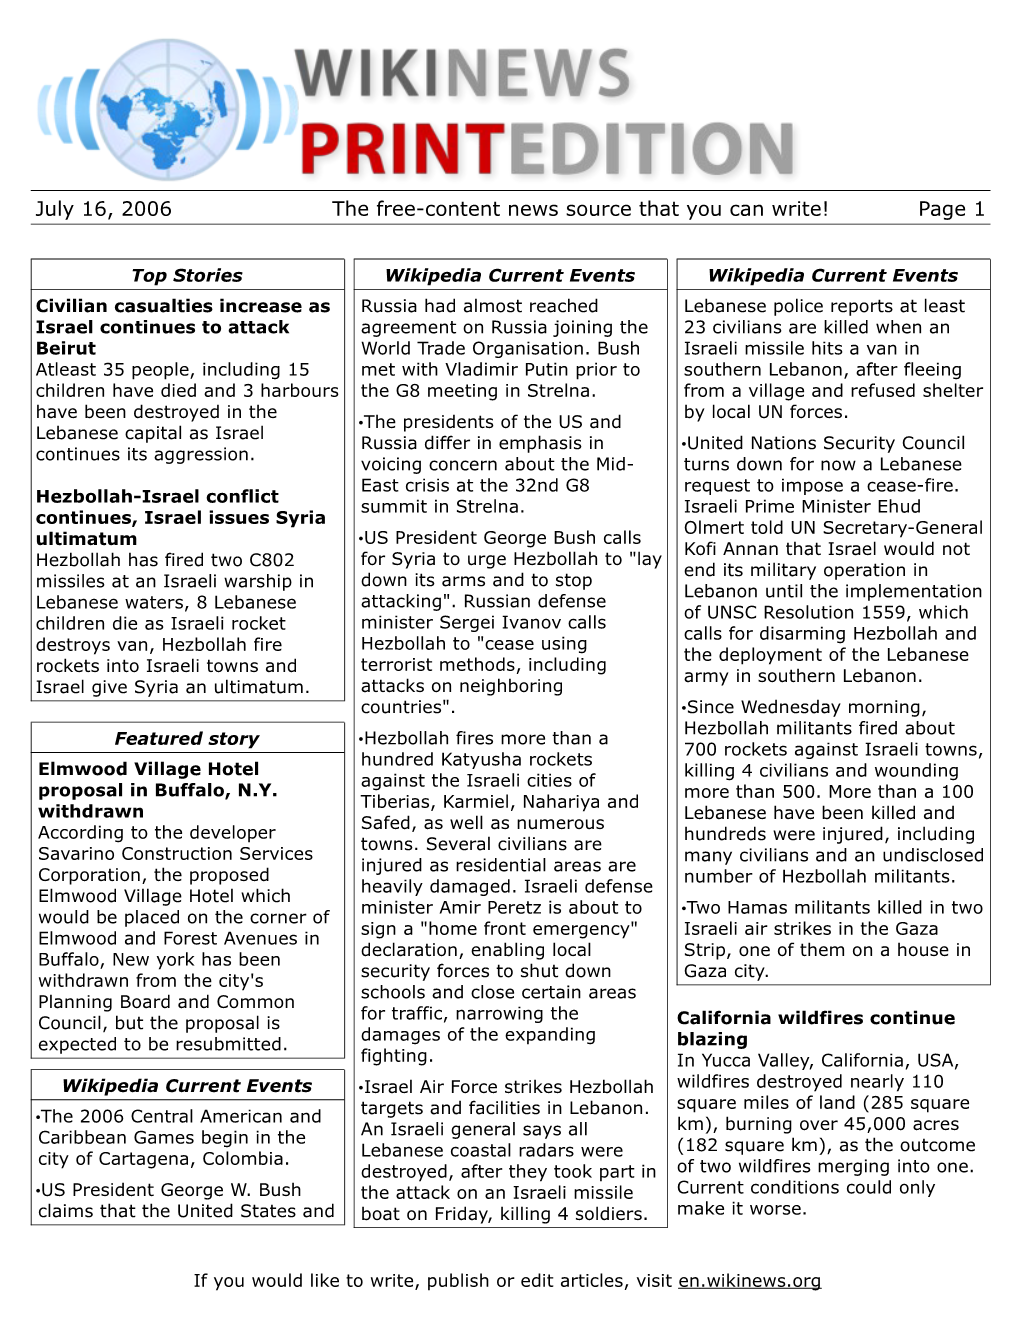 July 16, 2006 the Free-Content News Source That You Can Write! Page 1